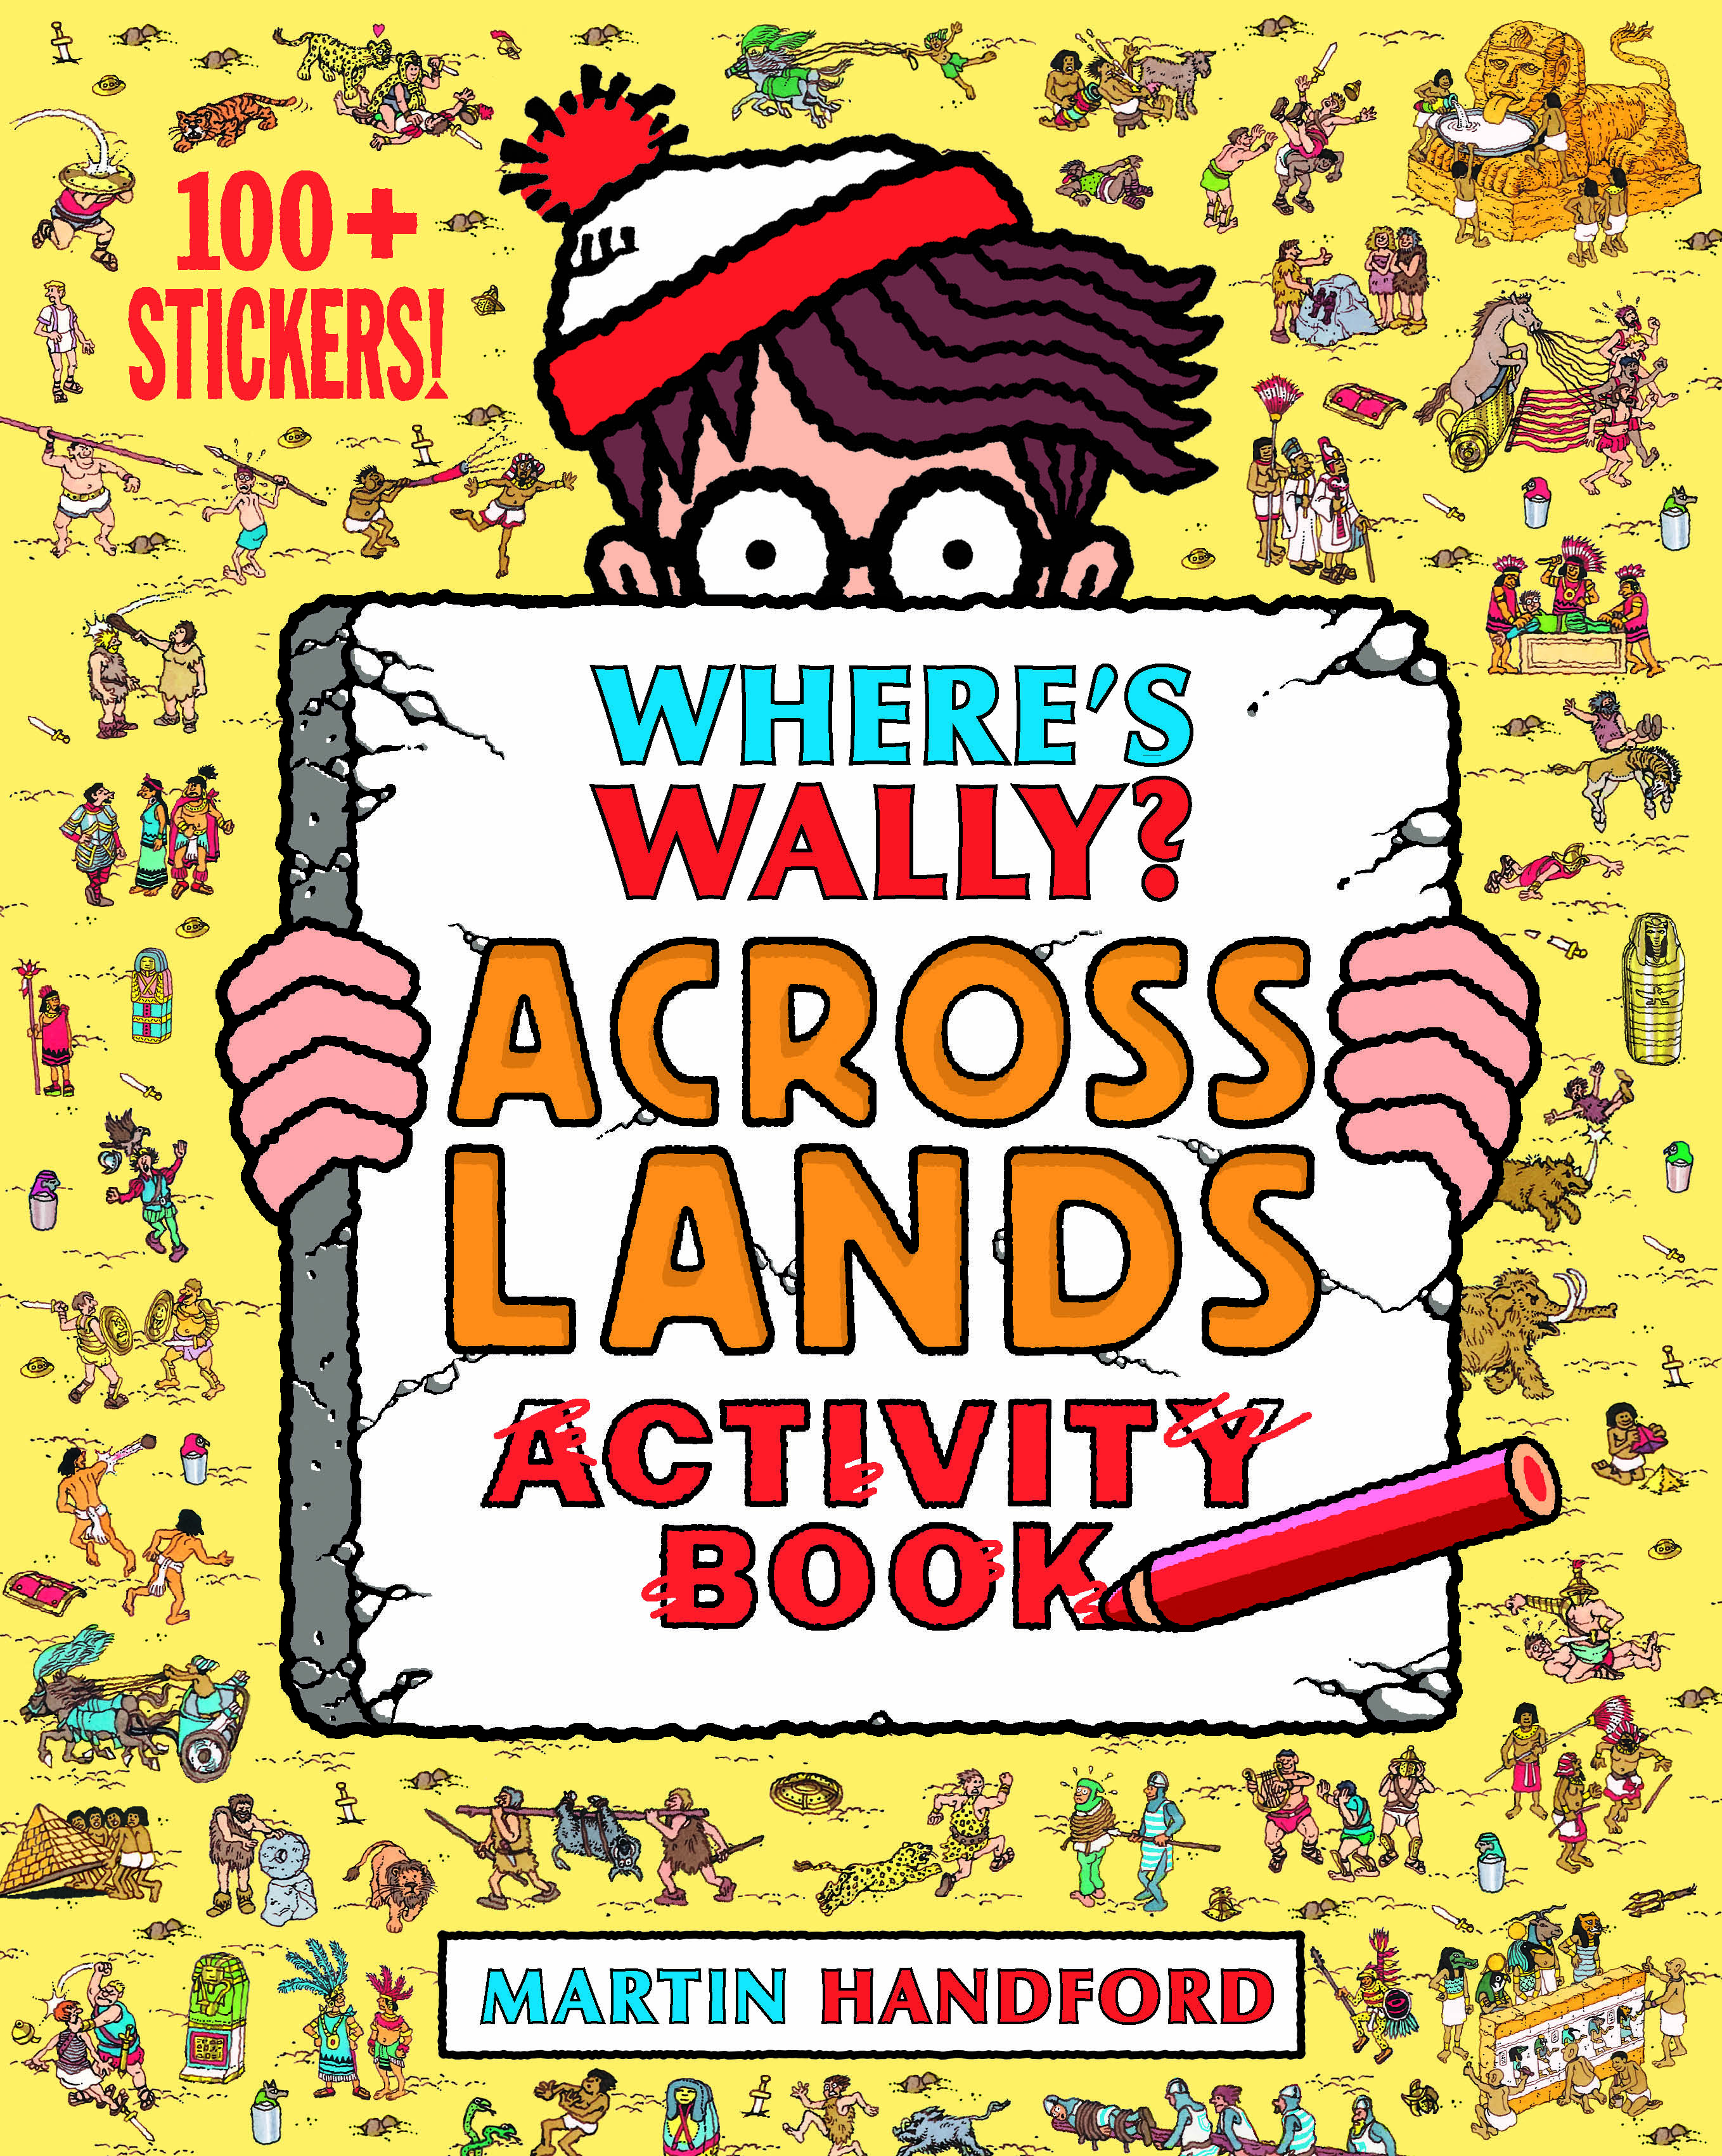 Where-s-Wally-Across-Lands